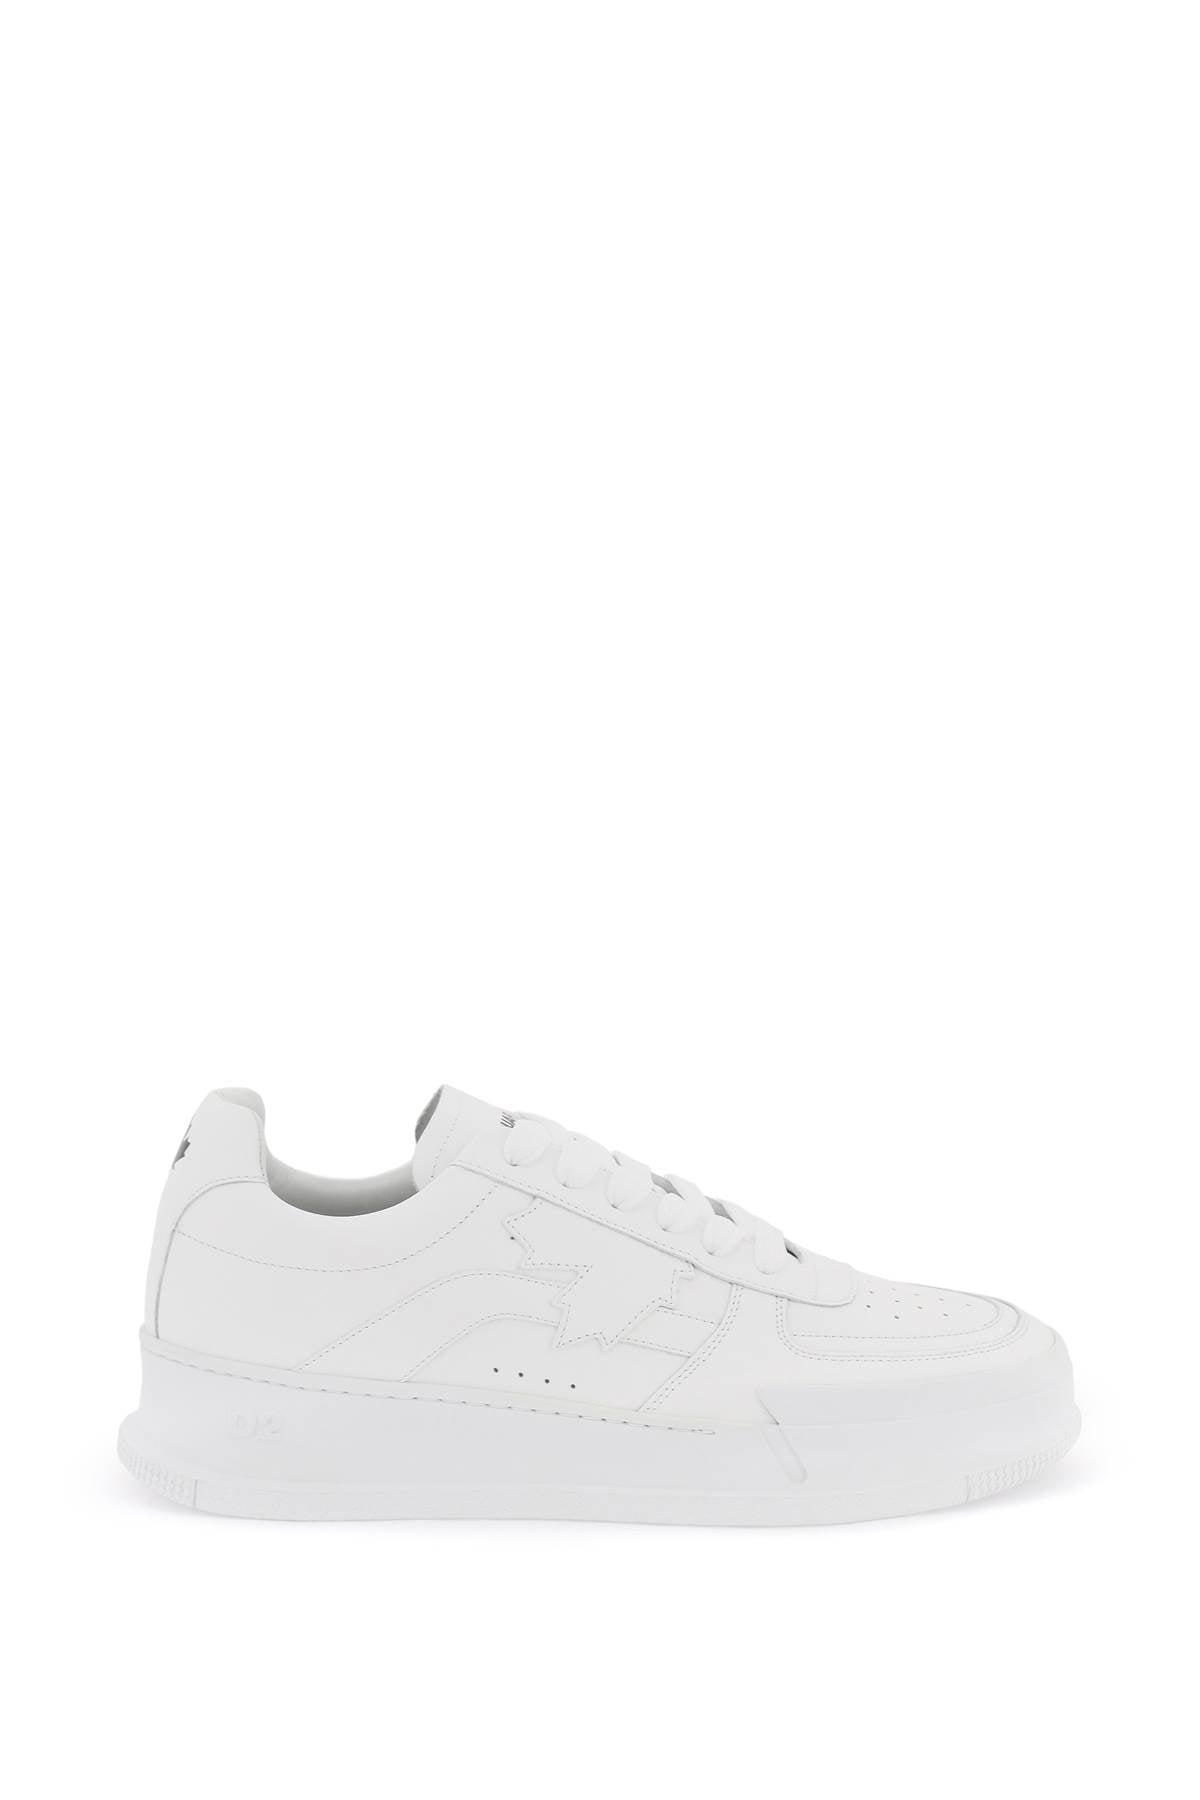 Dsquared2 canadian sneakers-0